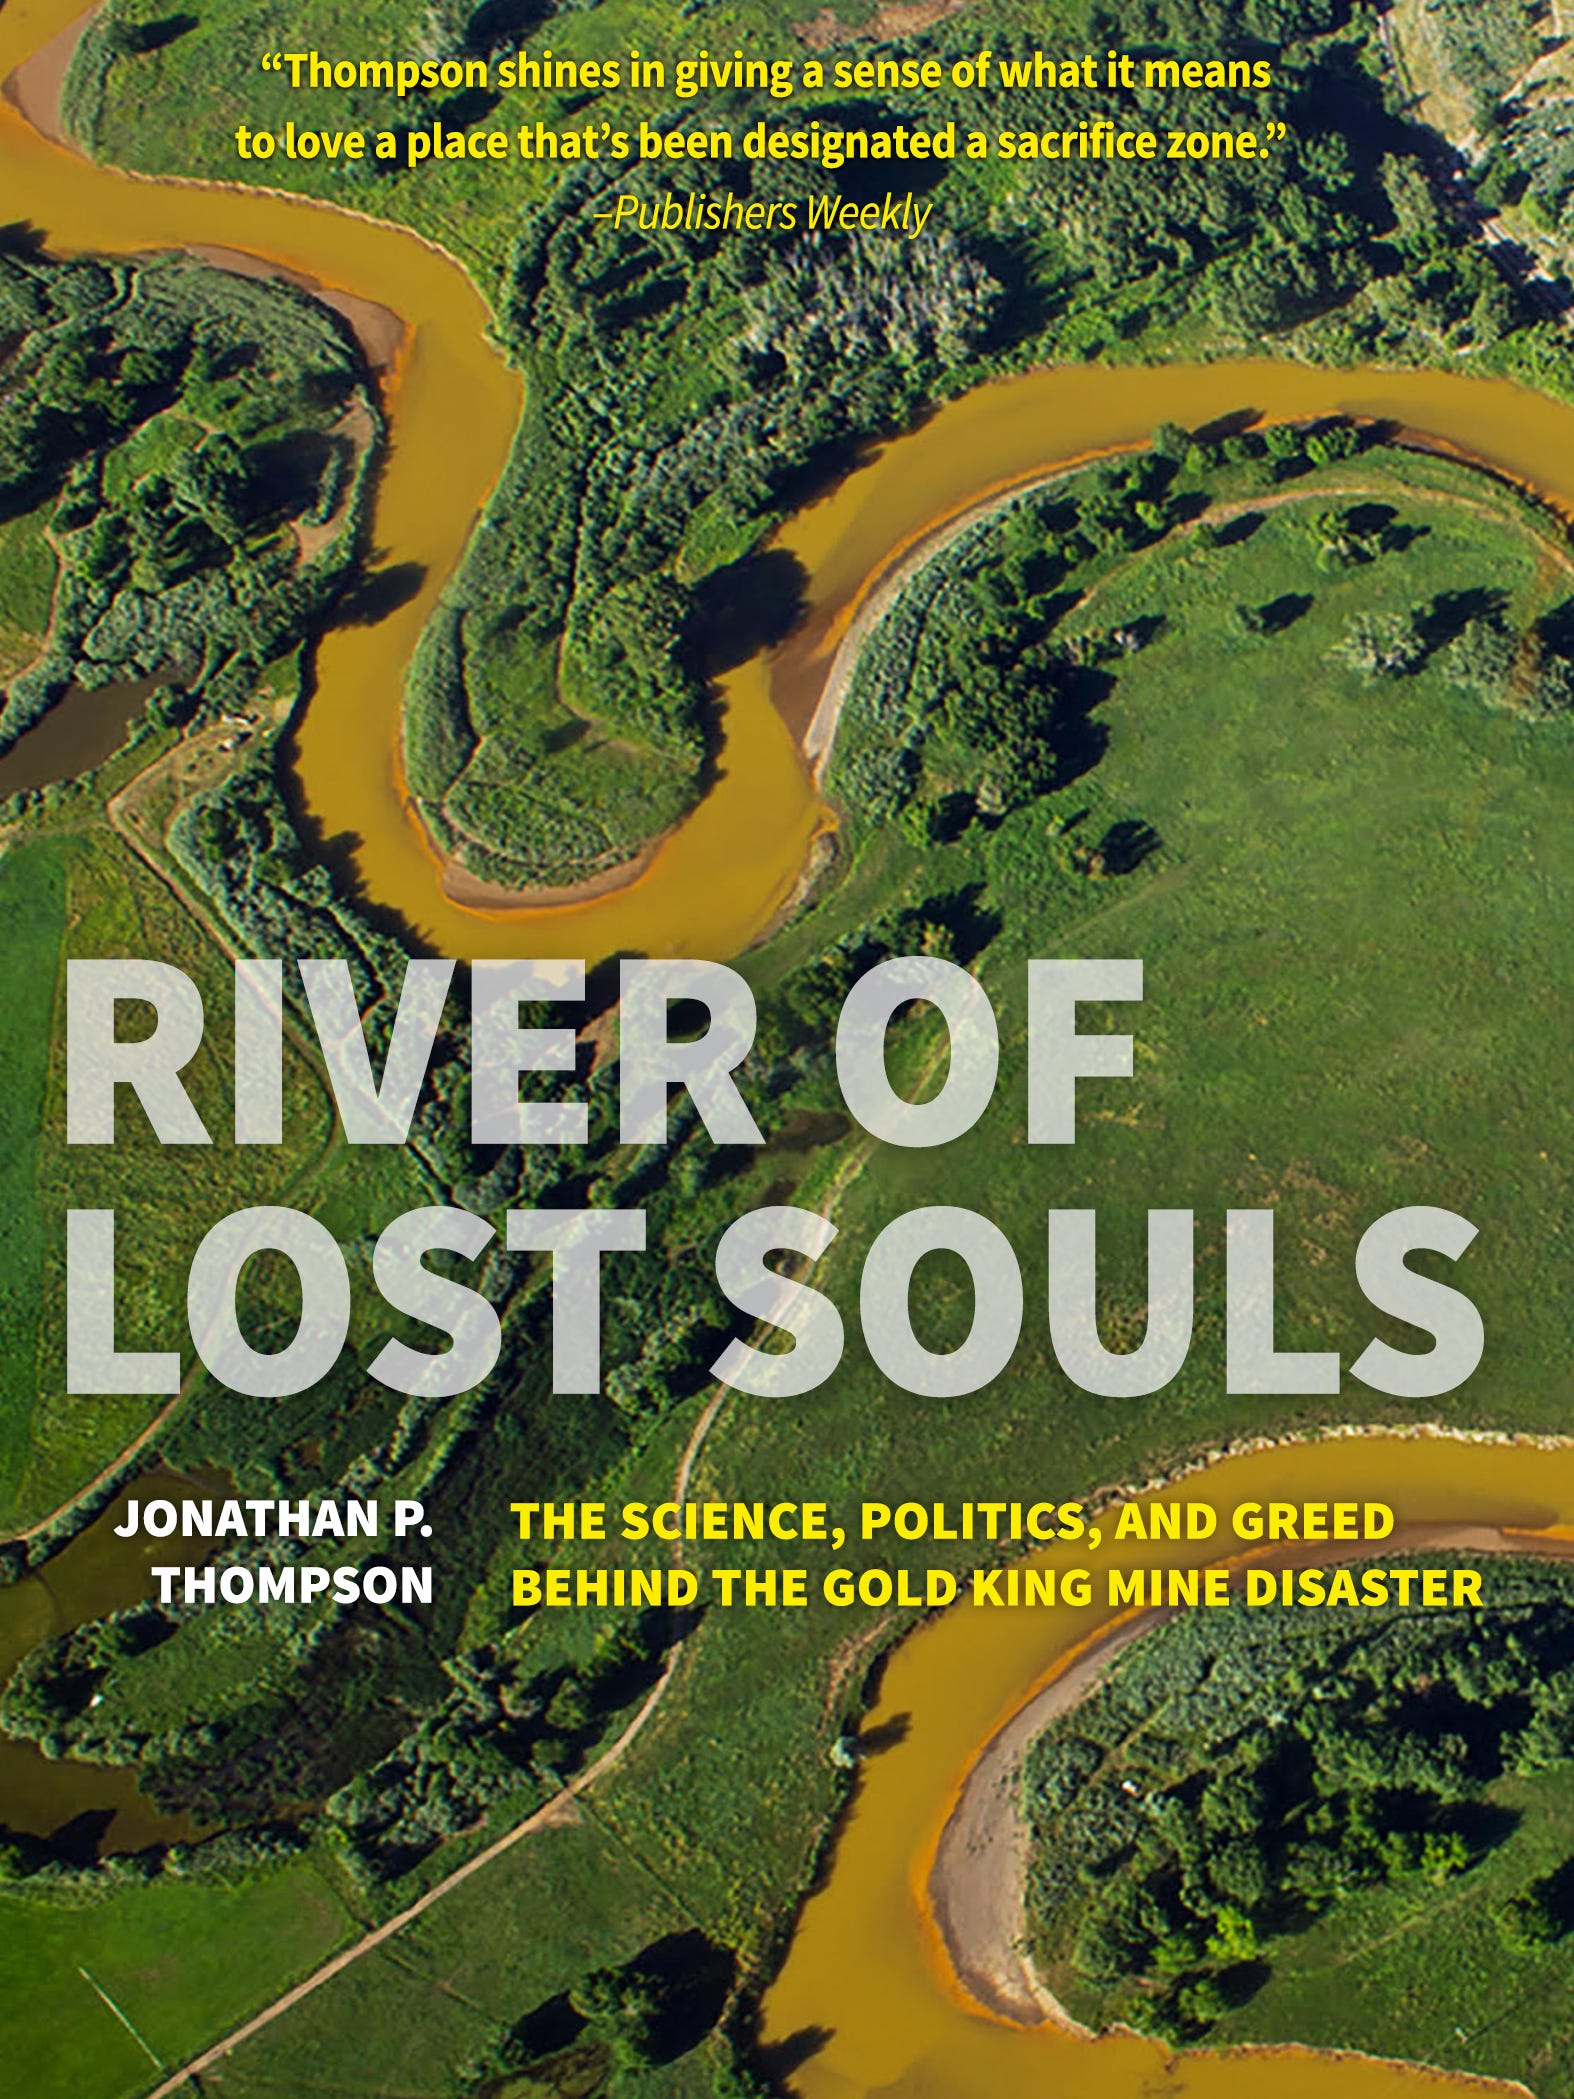 The cover of Jonathan Thompson's "River of Lost Souls," an examination of the causes and aftermath of the Gold King Mine spill.